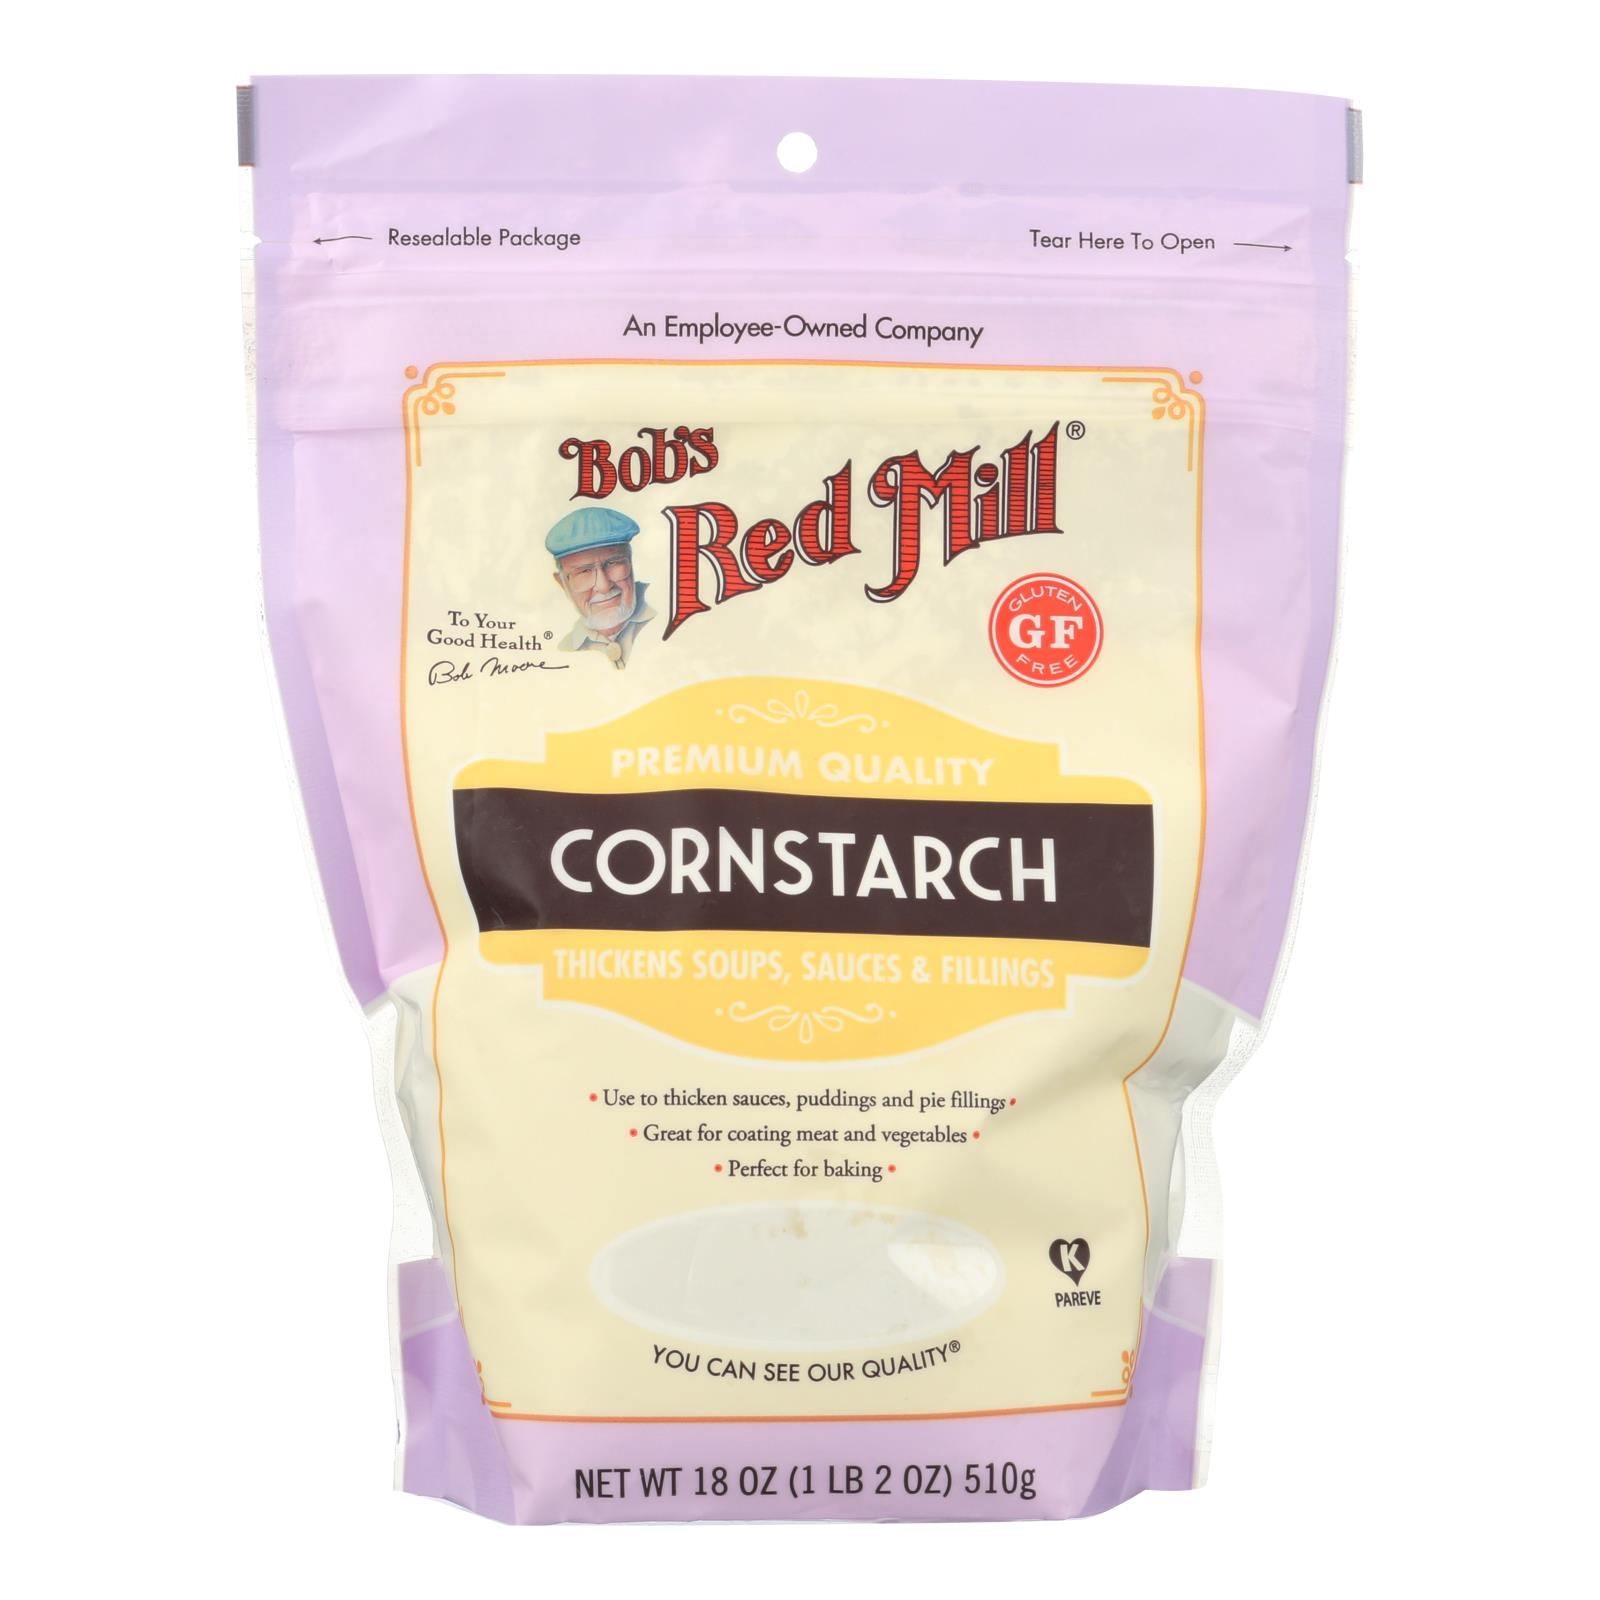 Bob's Red Mill - Cornstarch - Case Of 4-18 Oz - Whole Green Foods